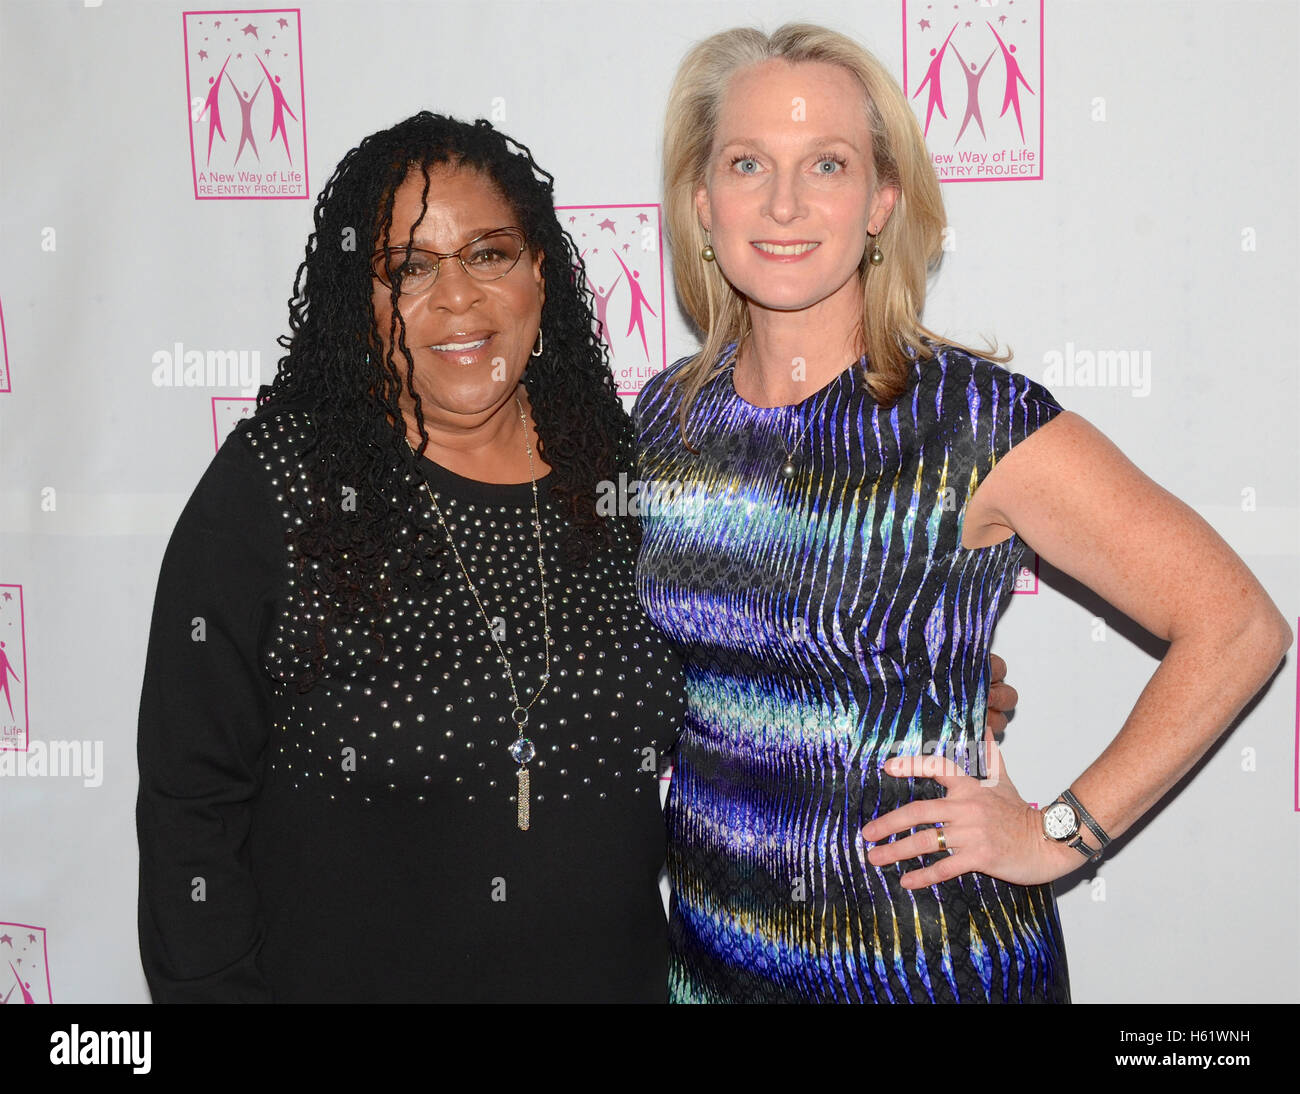 Susan Burton And Piper Kerman Attends Cnn Hero Susan Burton S A New Way Of Life Re Entry Project 17th Annual Red Carpet Awards Gala At The Omni Hotel In Los Angeles California On